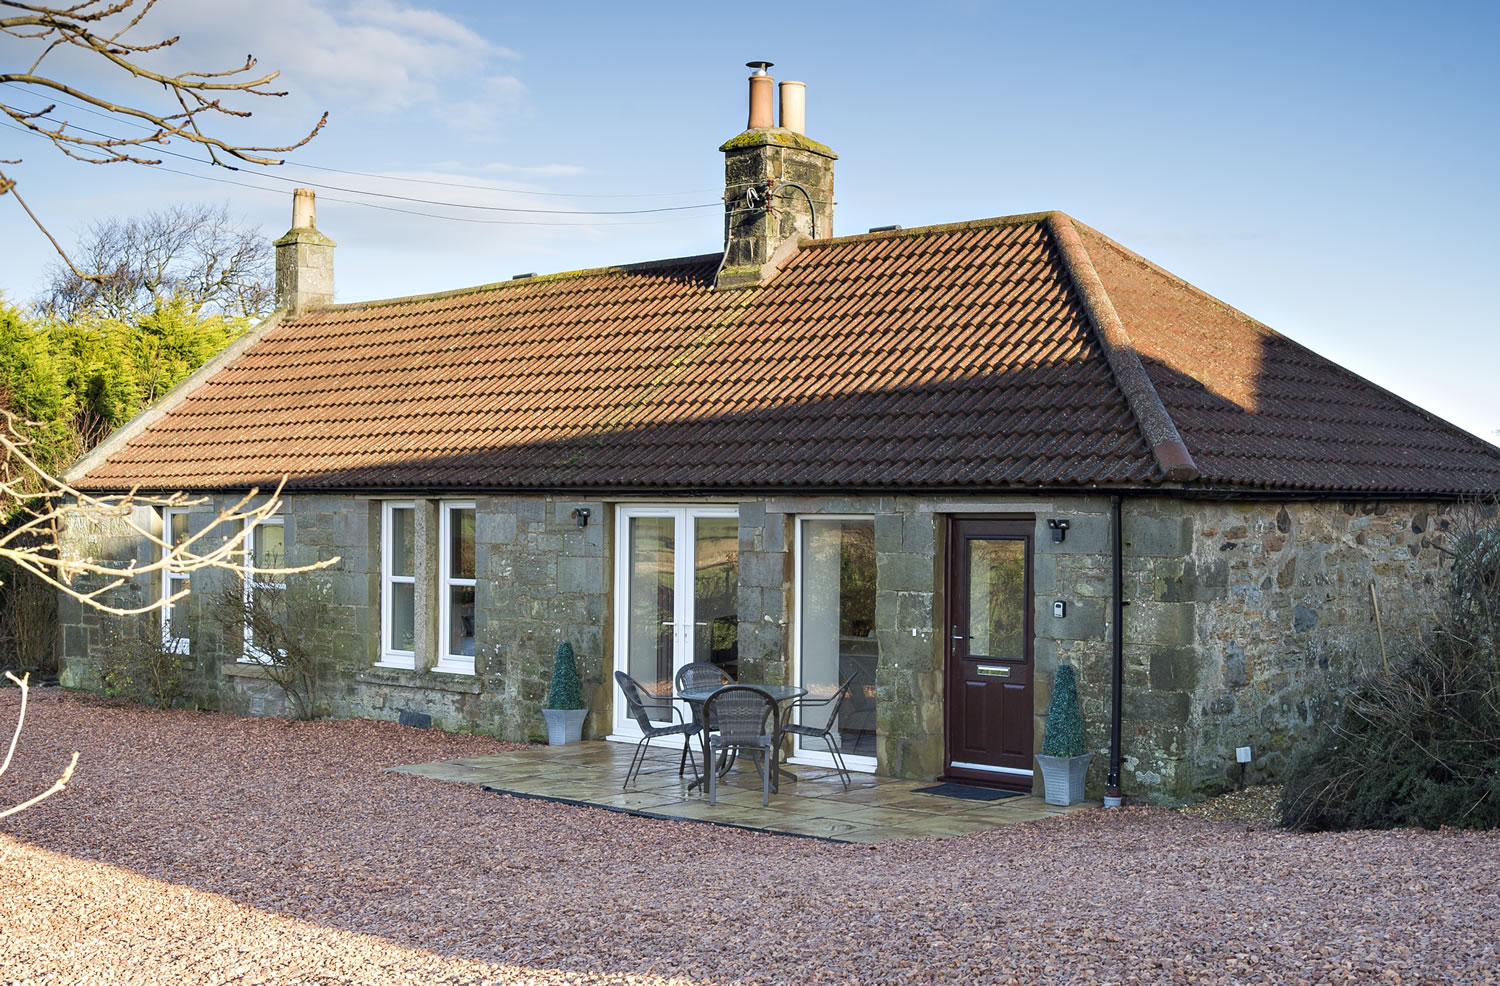 Self catering holiday cottages St Andrews